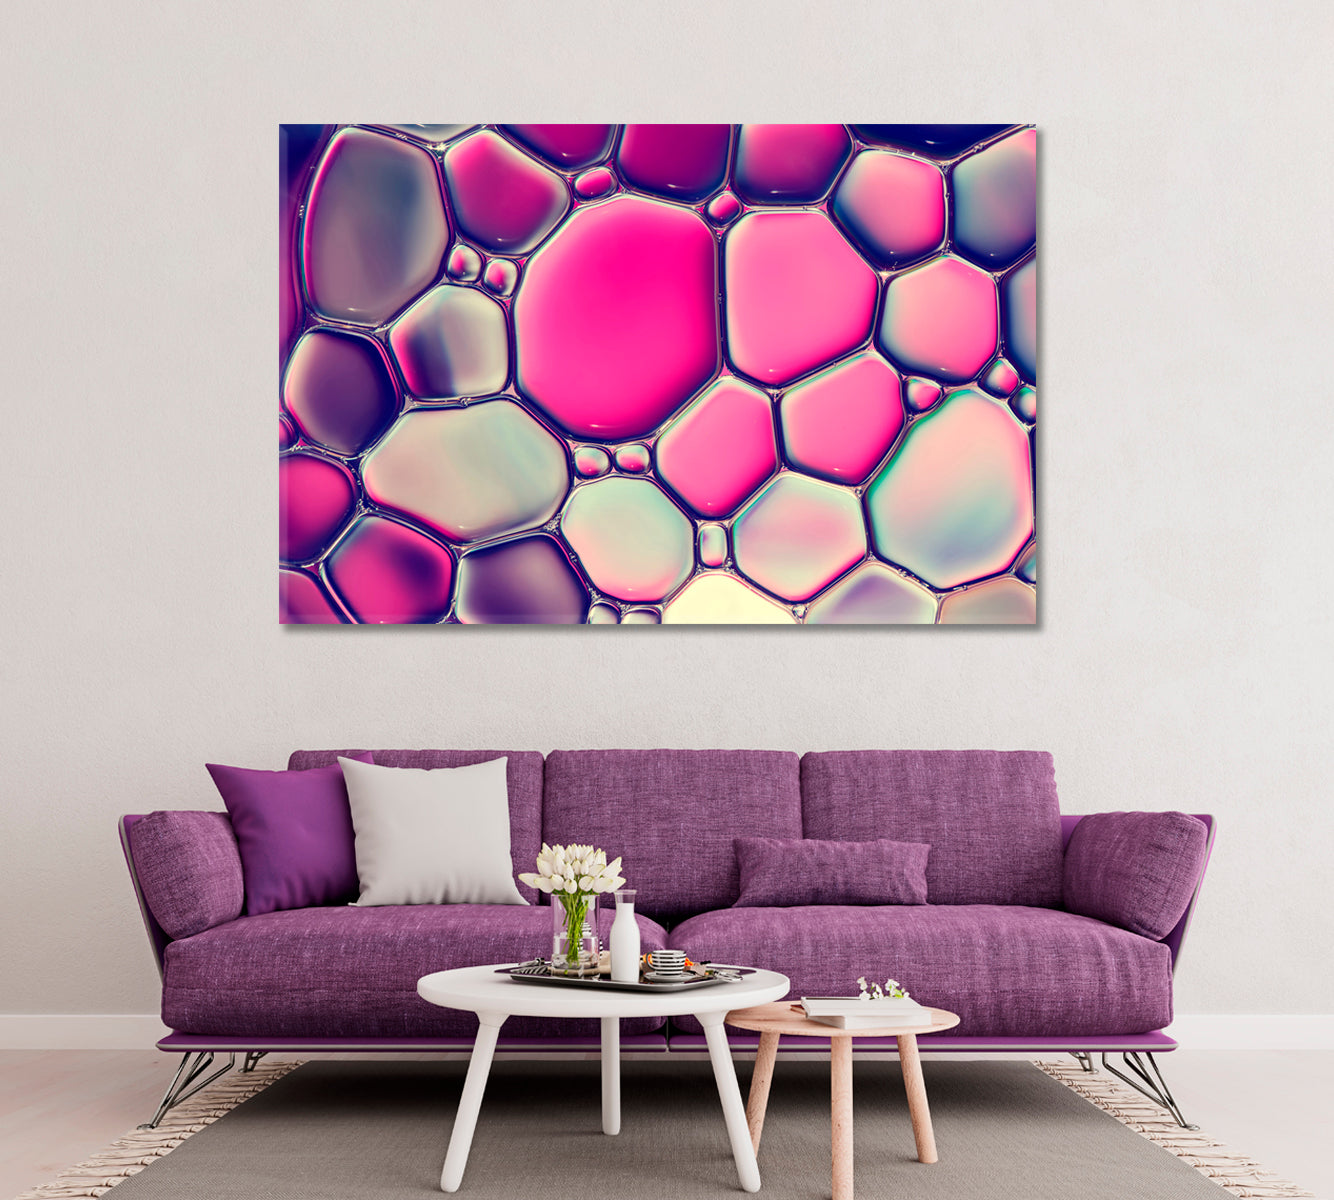 Stunning Abstract Water Bubbles Canvas Print ArtLexy 1 Panel 24"x16" inches 